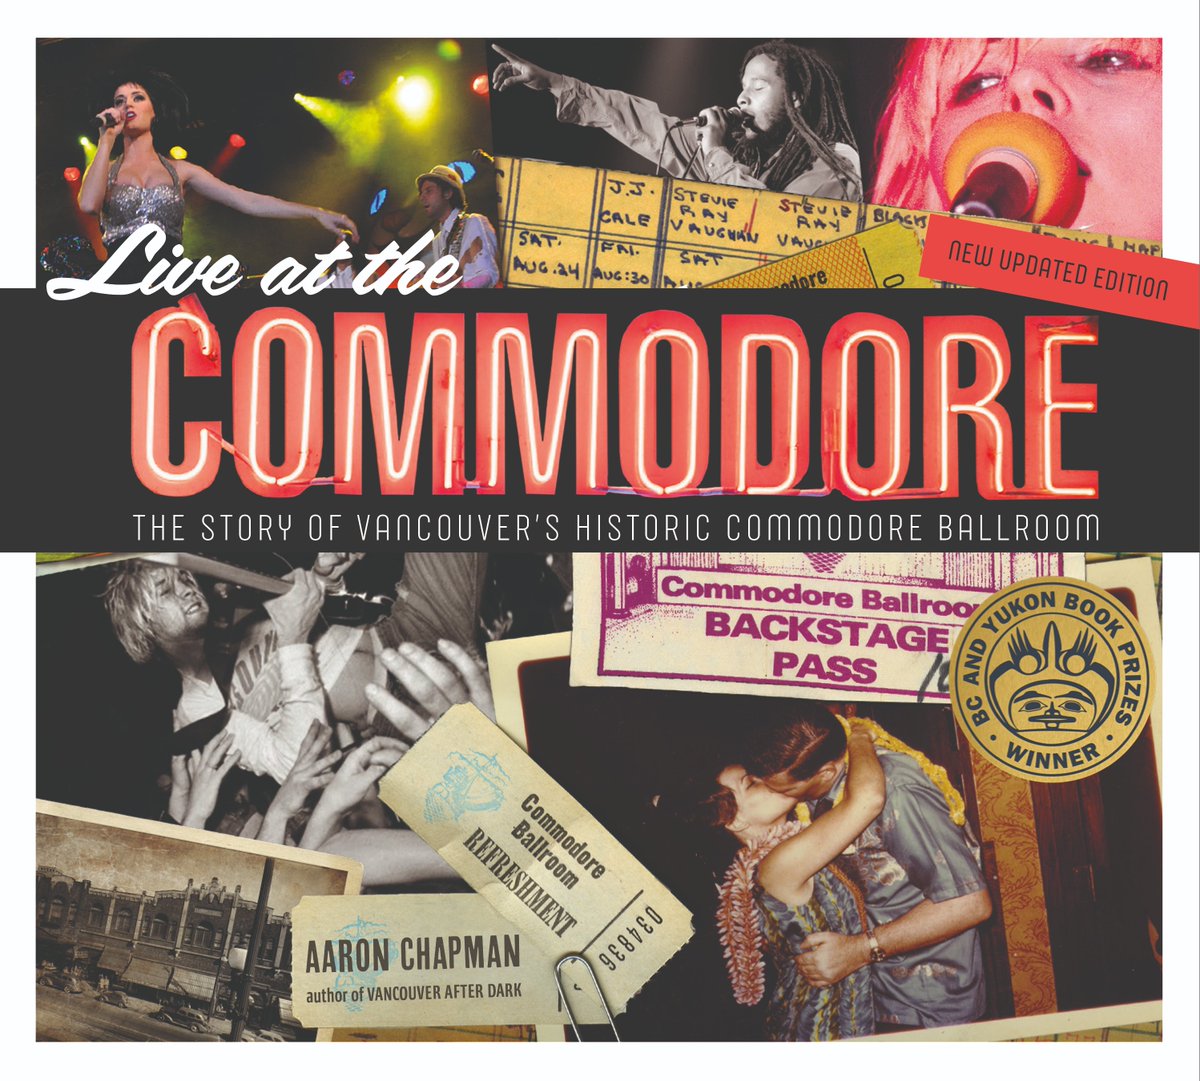 .Big news! My 2015 book #LiveAtTheCommodore: The Story of #Vancouver's Historic #CommodoreBallroom will be released in a New Updated Edition fall 2023.
Some new chapters, stories, posters from the archives, & perhaps what's in hold for the future of Canada's Greatest music venue.